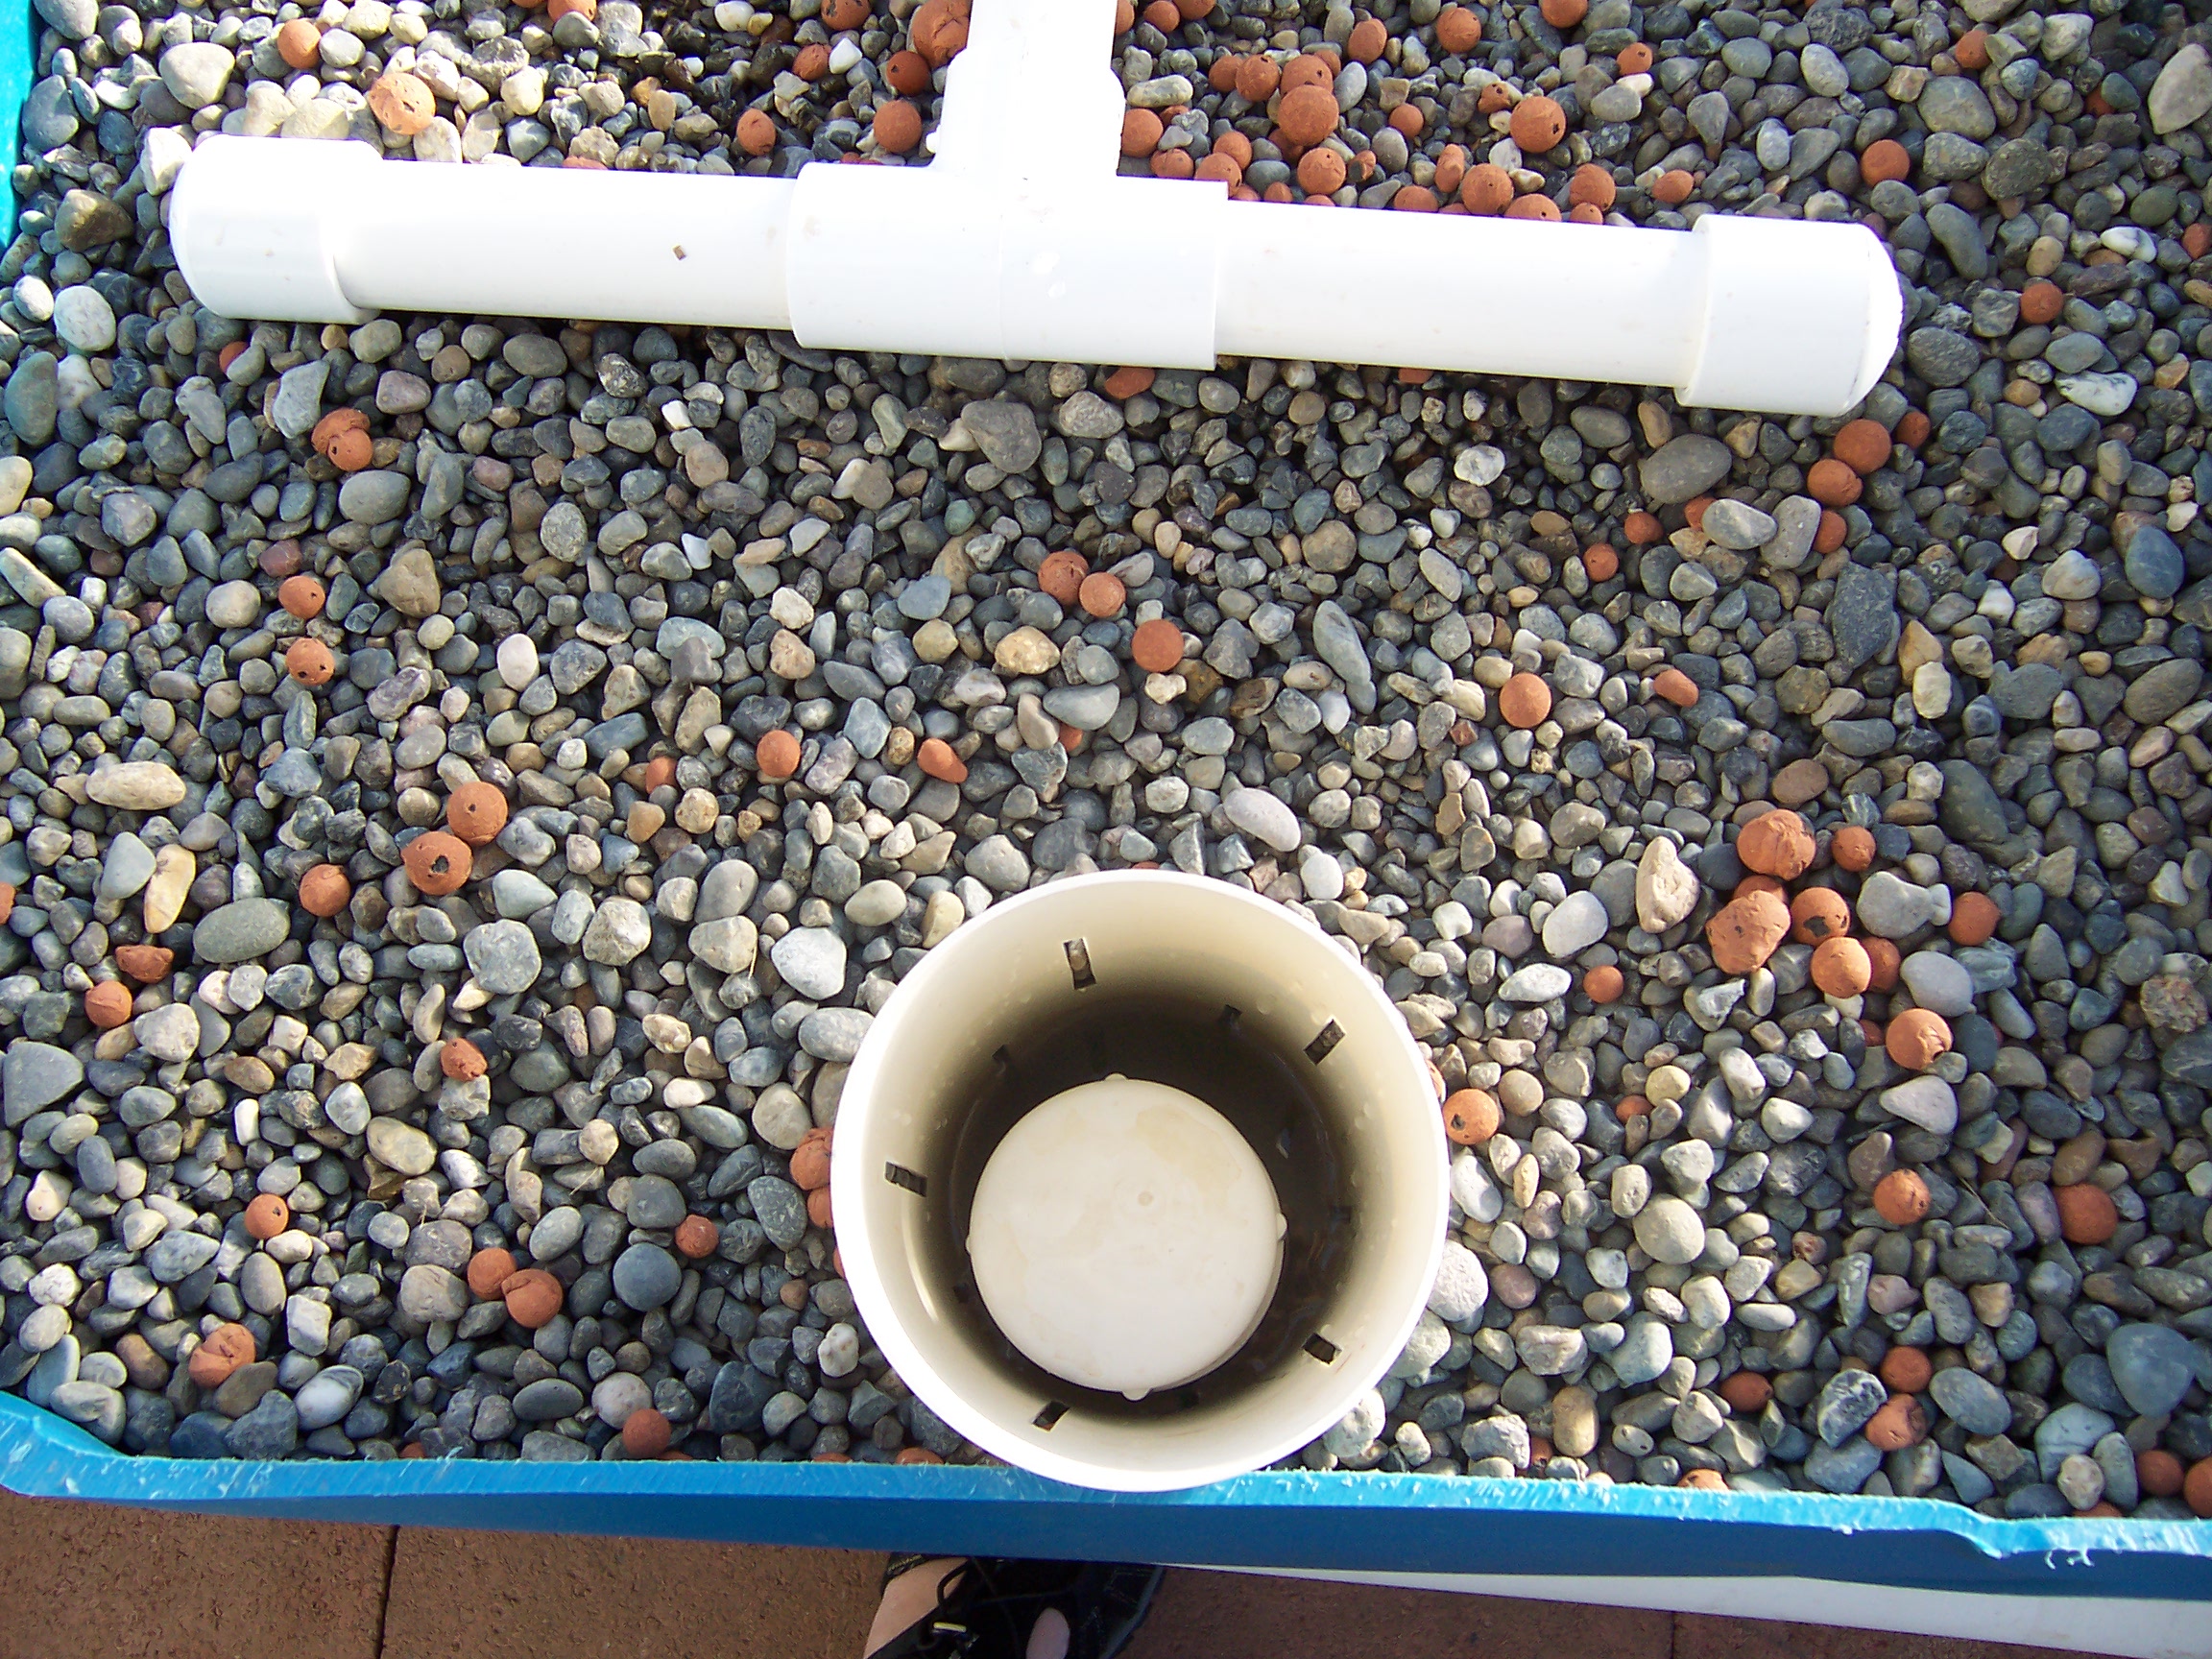 Aquaponics plumbing: Bell siphon in place